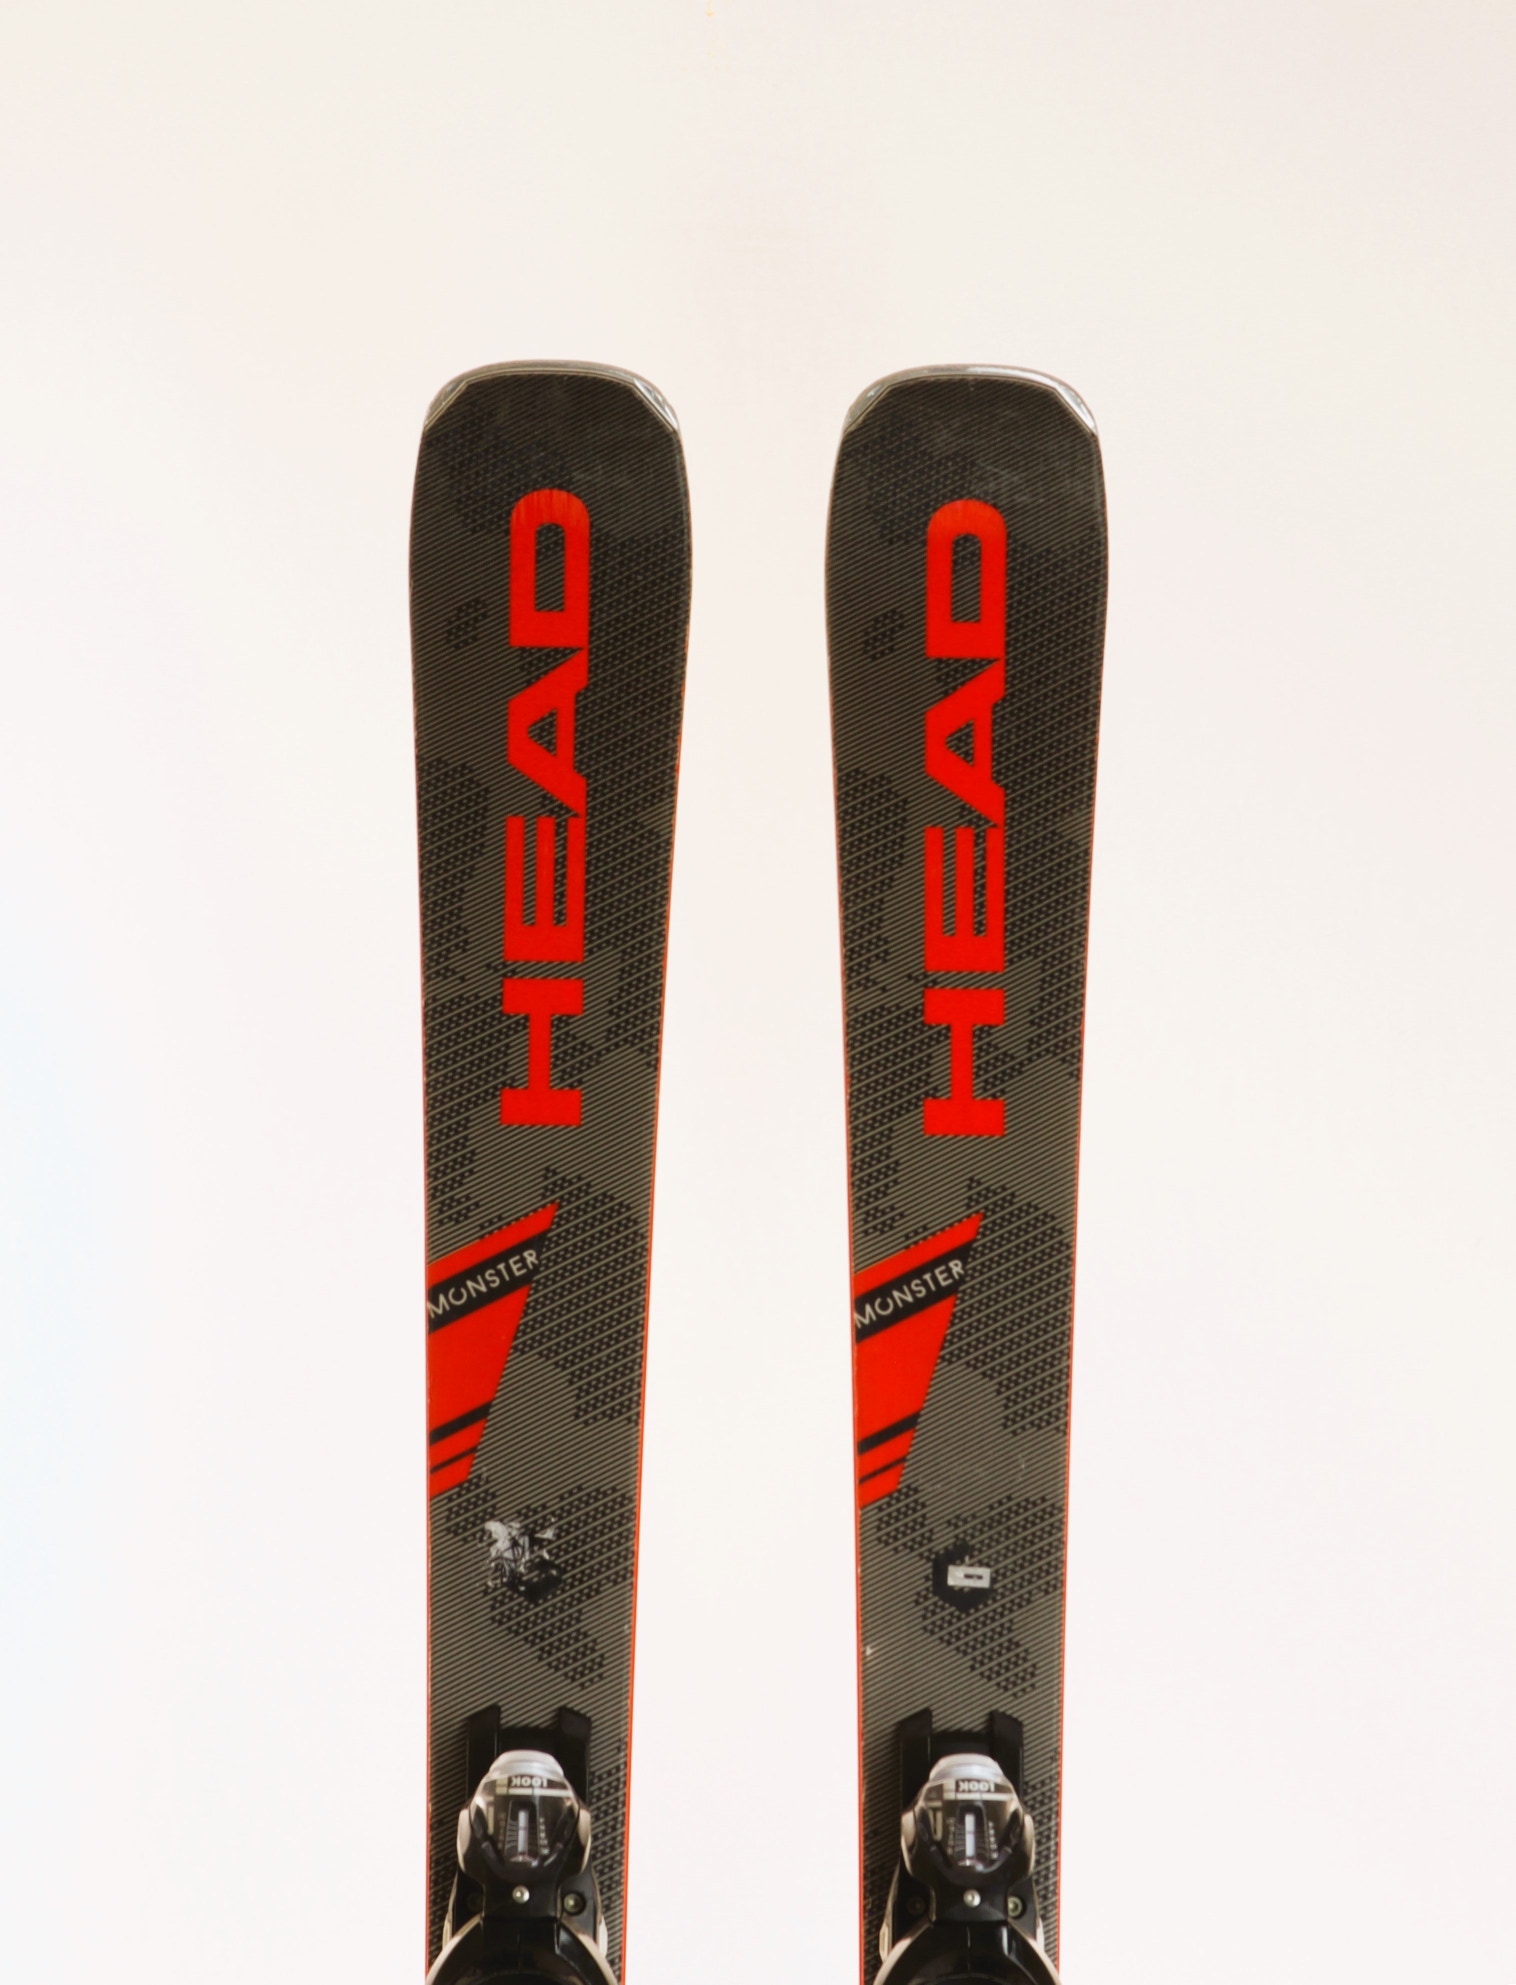 Used 2020 Head Monster 88 Demo Ski with Look SPX 12 Bindings Size 156 (Option 231289)